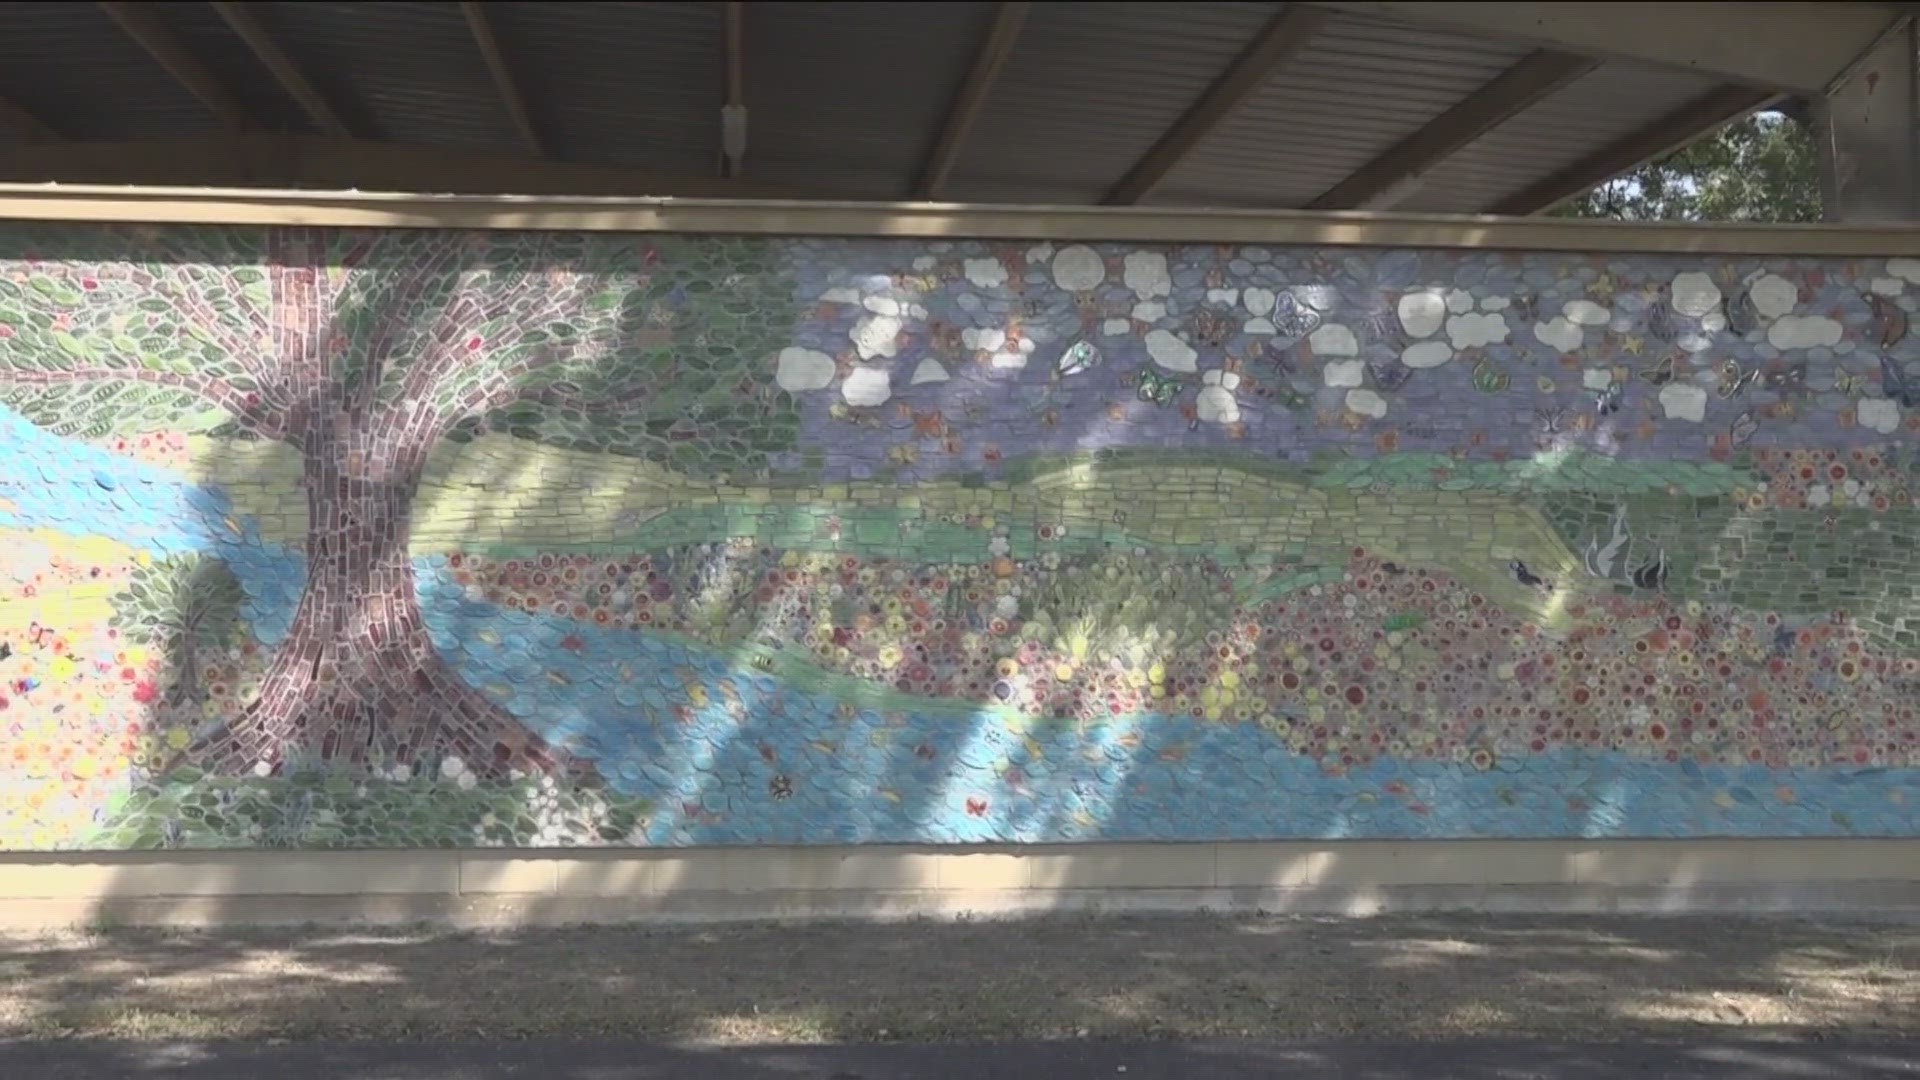 Art therapists went down to Uvalde to help those affected by the Robb Elementary School shooting express themselves by creating thousands of tiles for a mosaic.